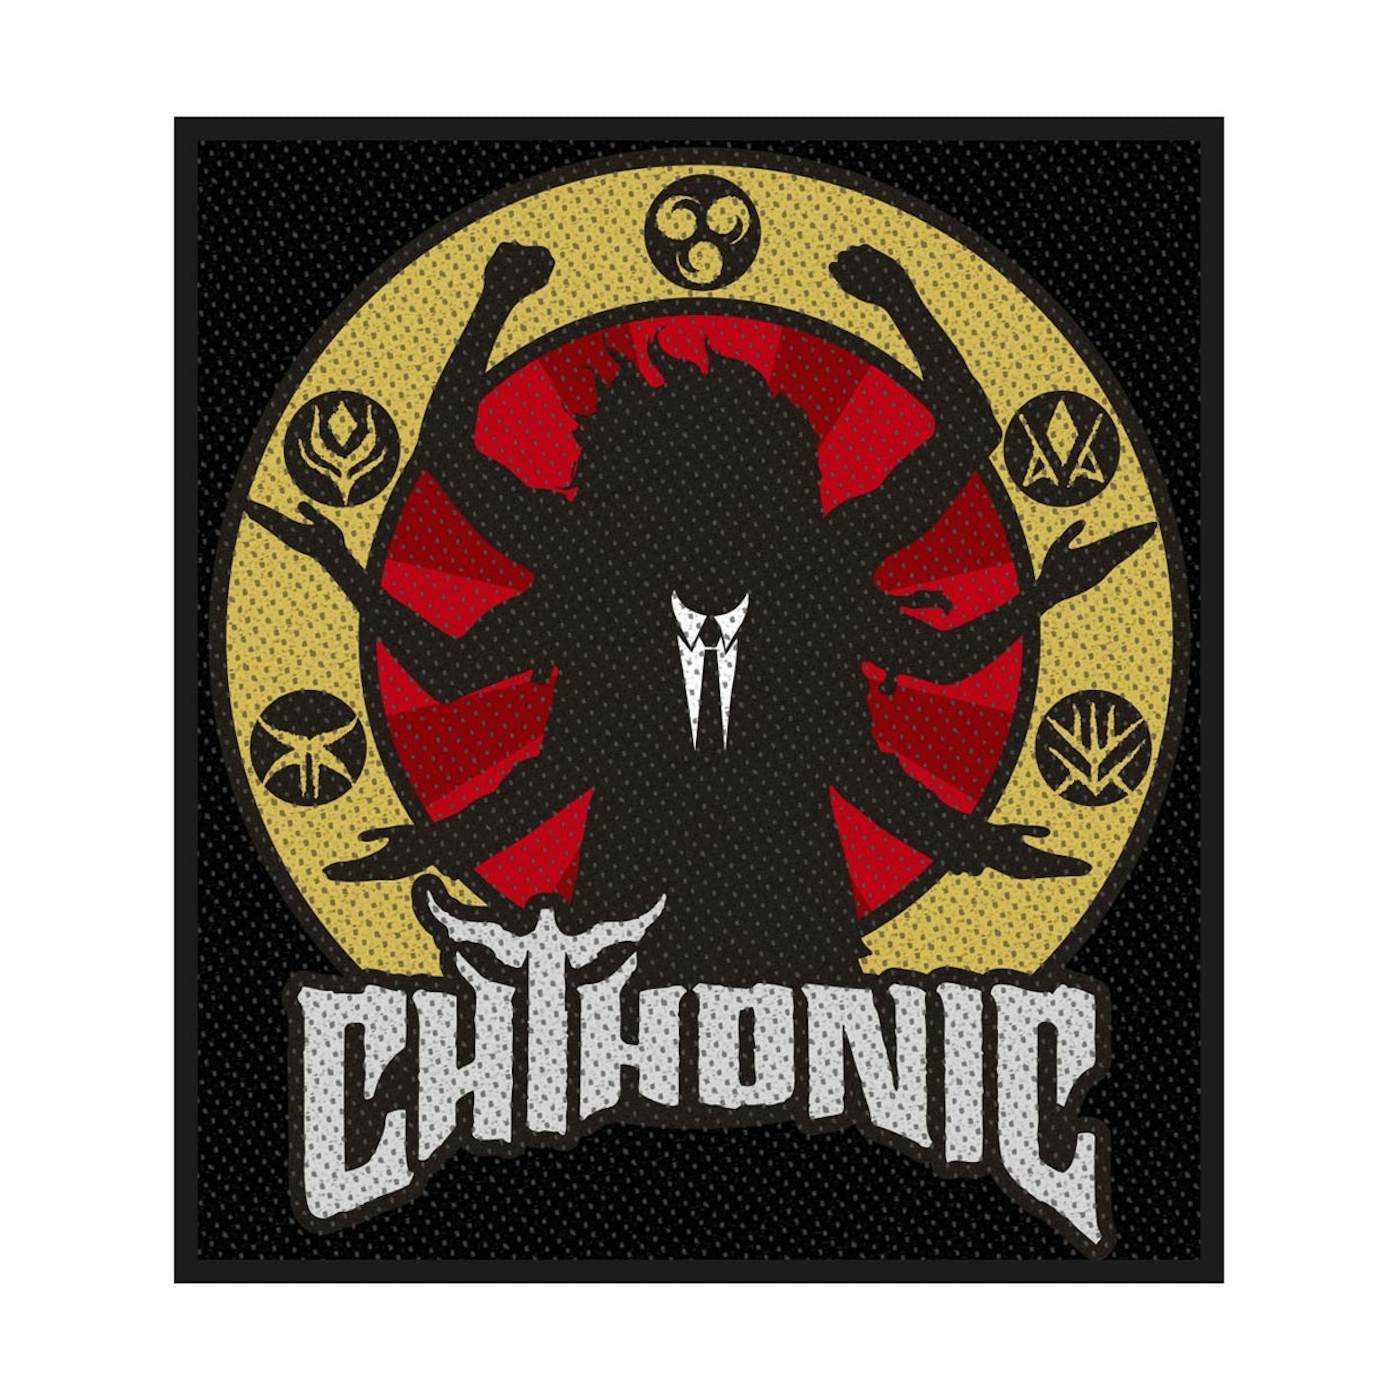 Chthonic Sew-On Patch - Deity